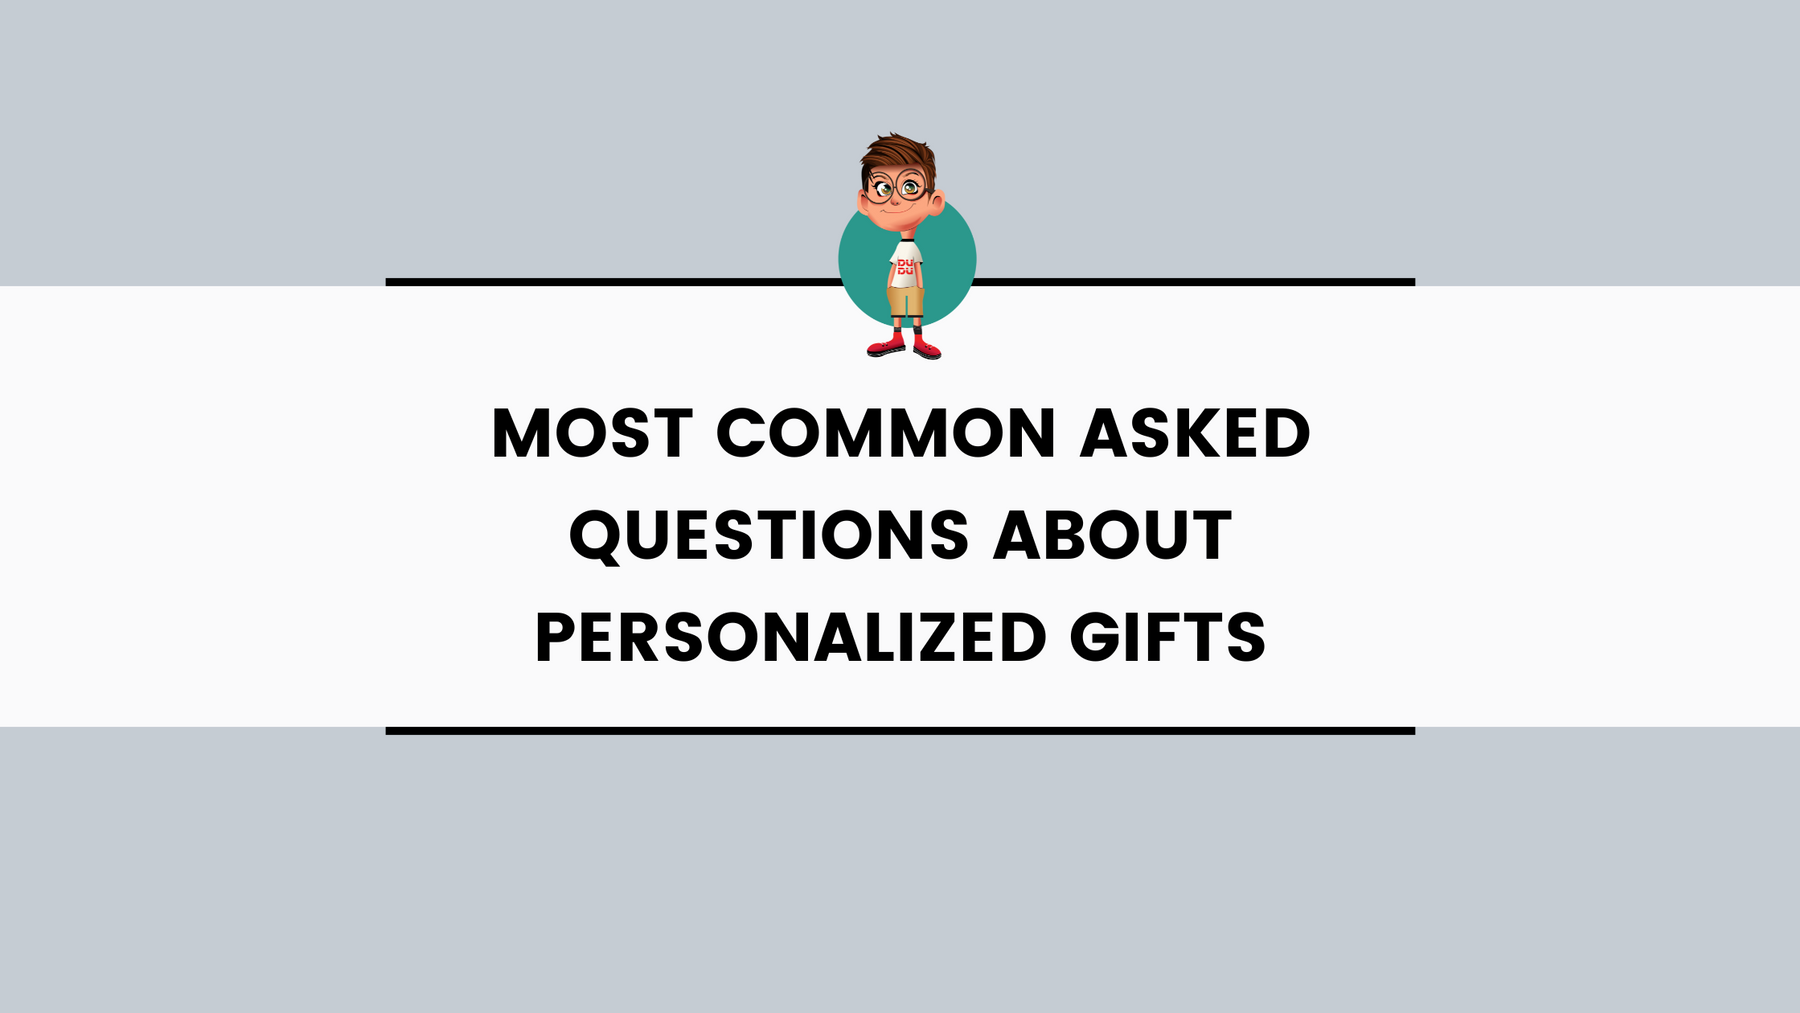 Most common asked questions about personalized gifts